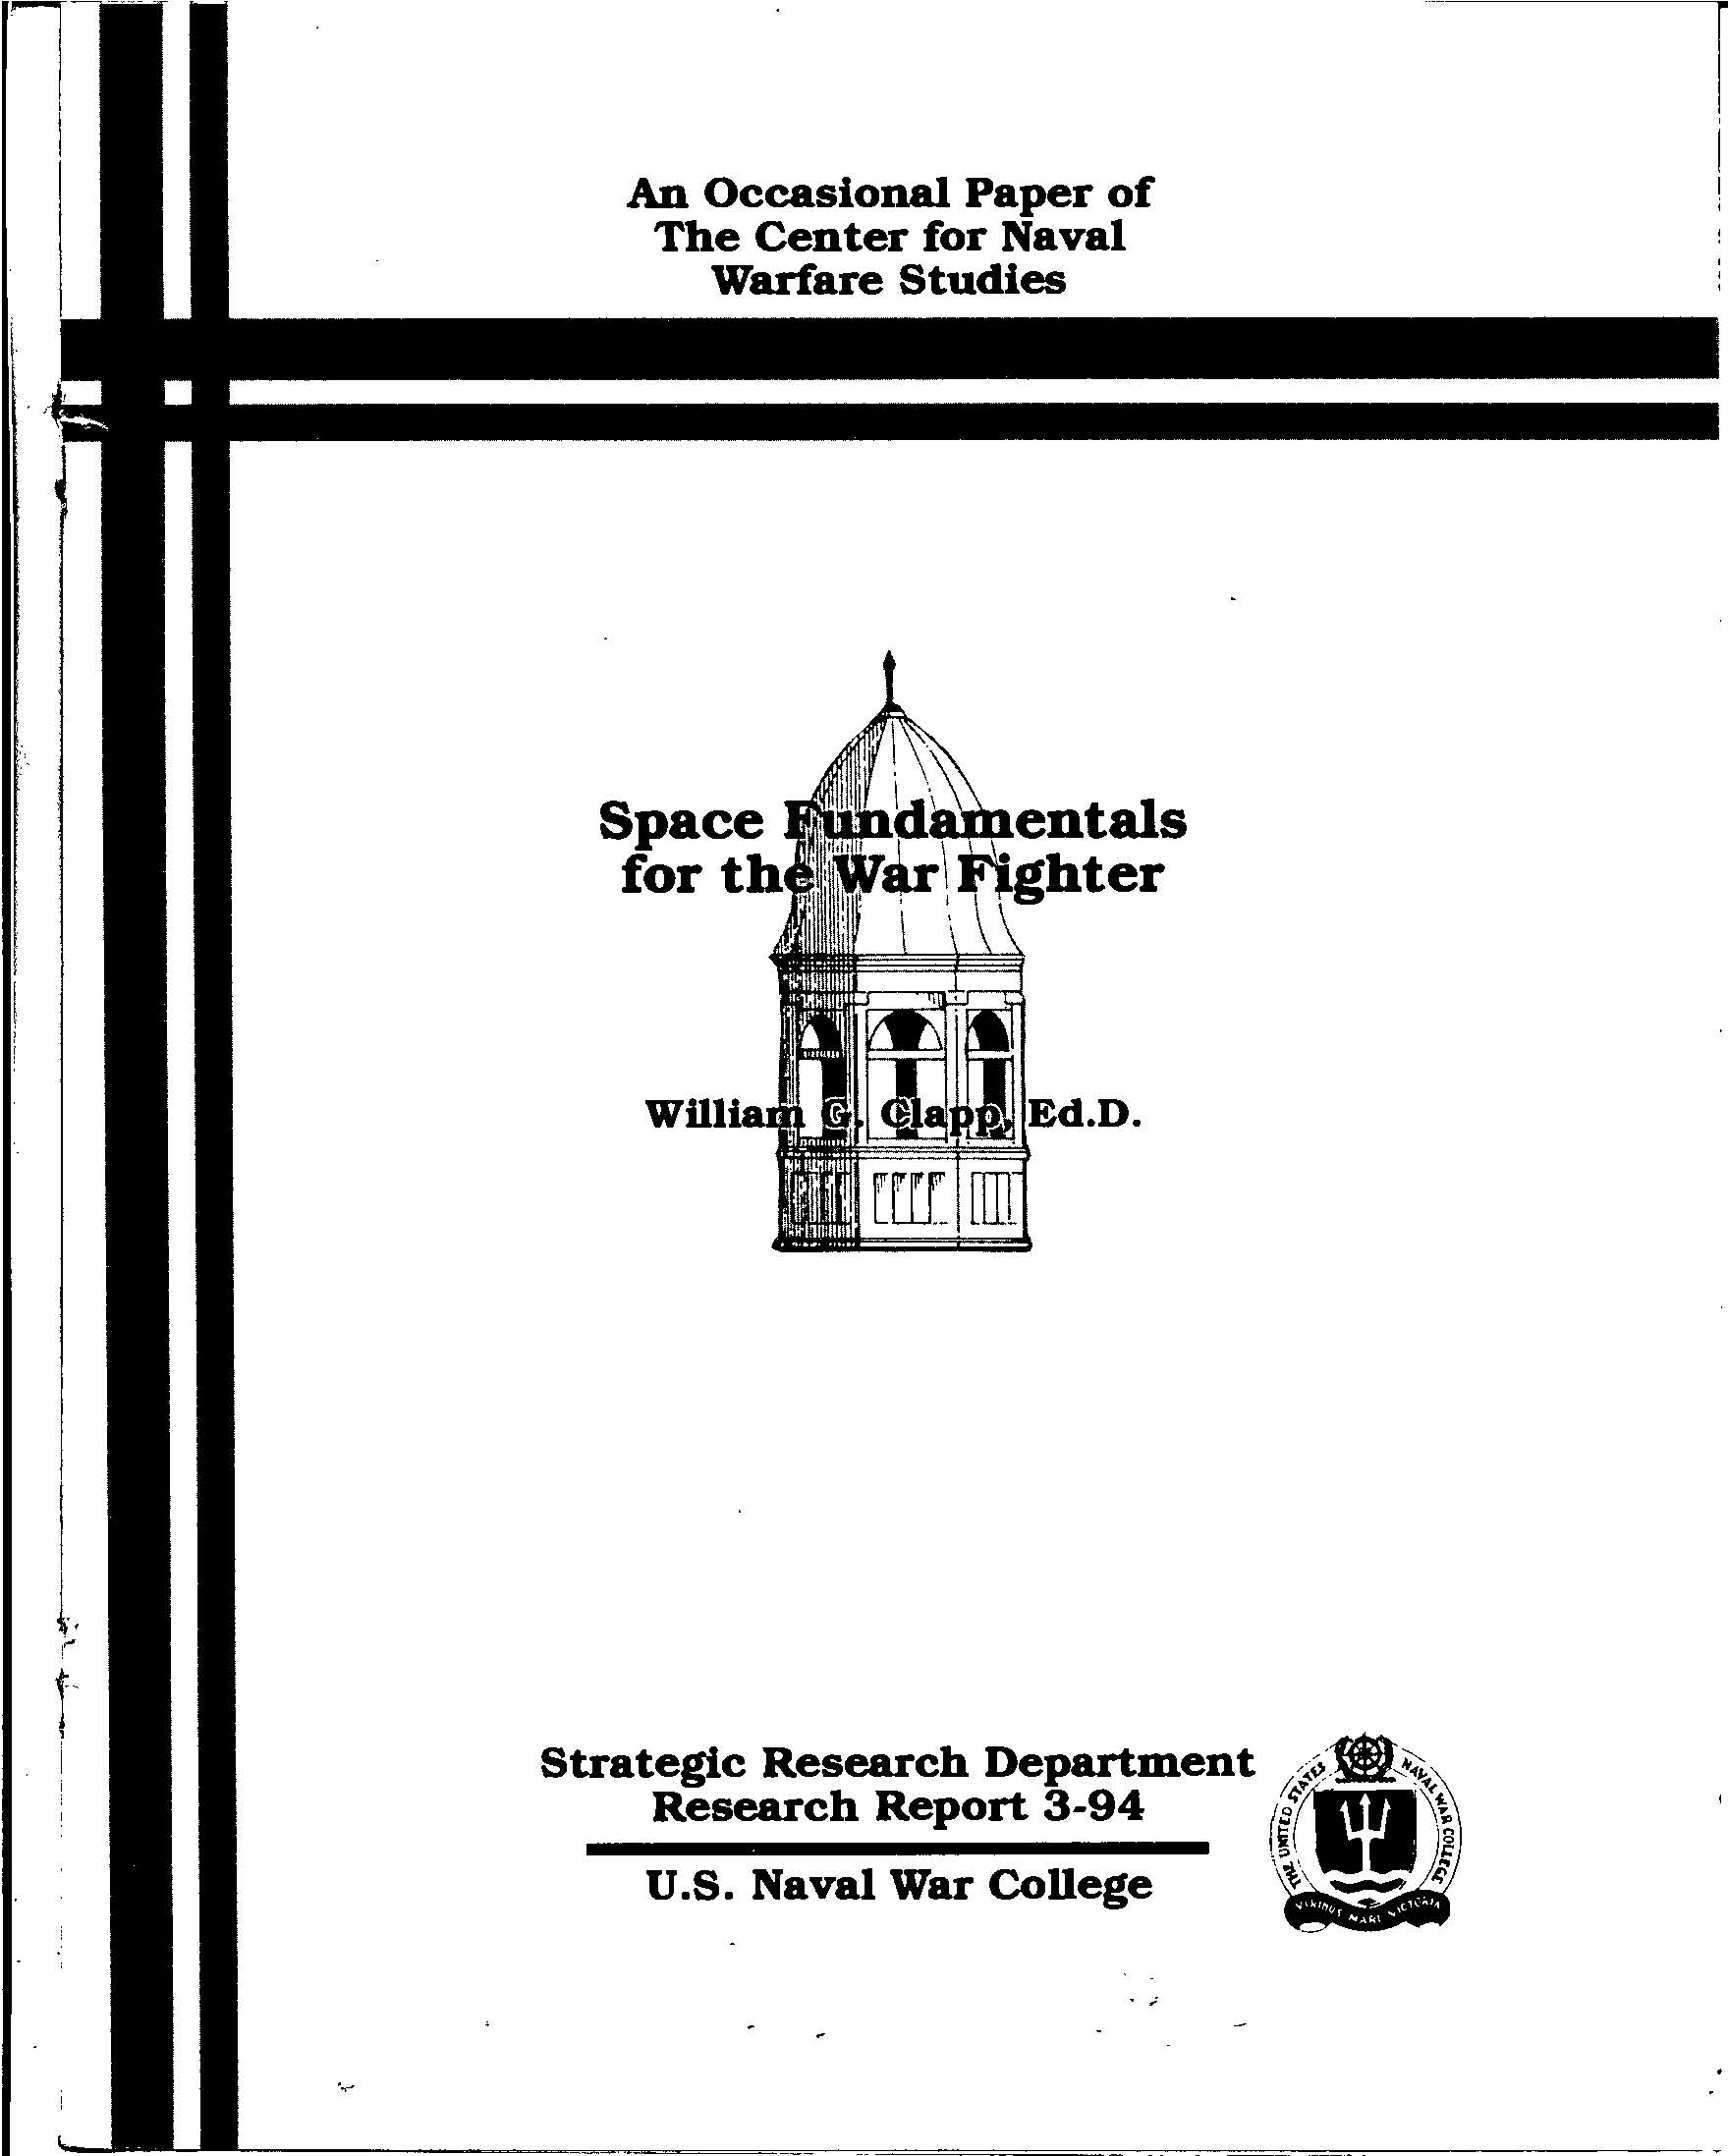 Space Fundamentals for the War Fighter, by William G. Clapp